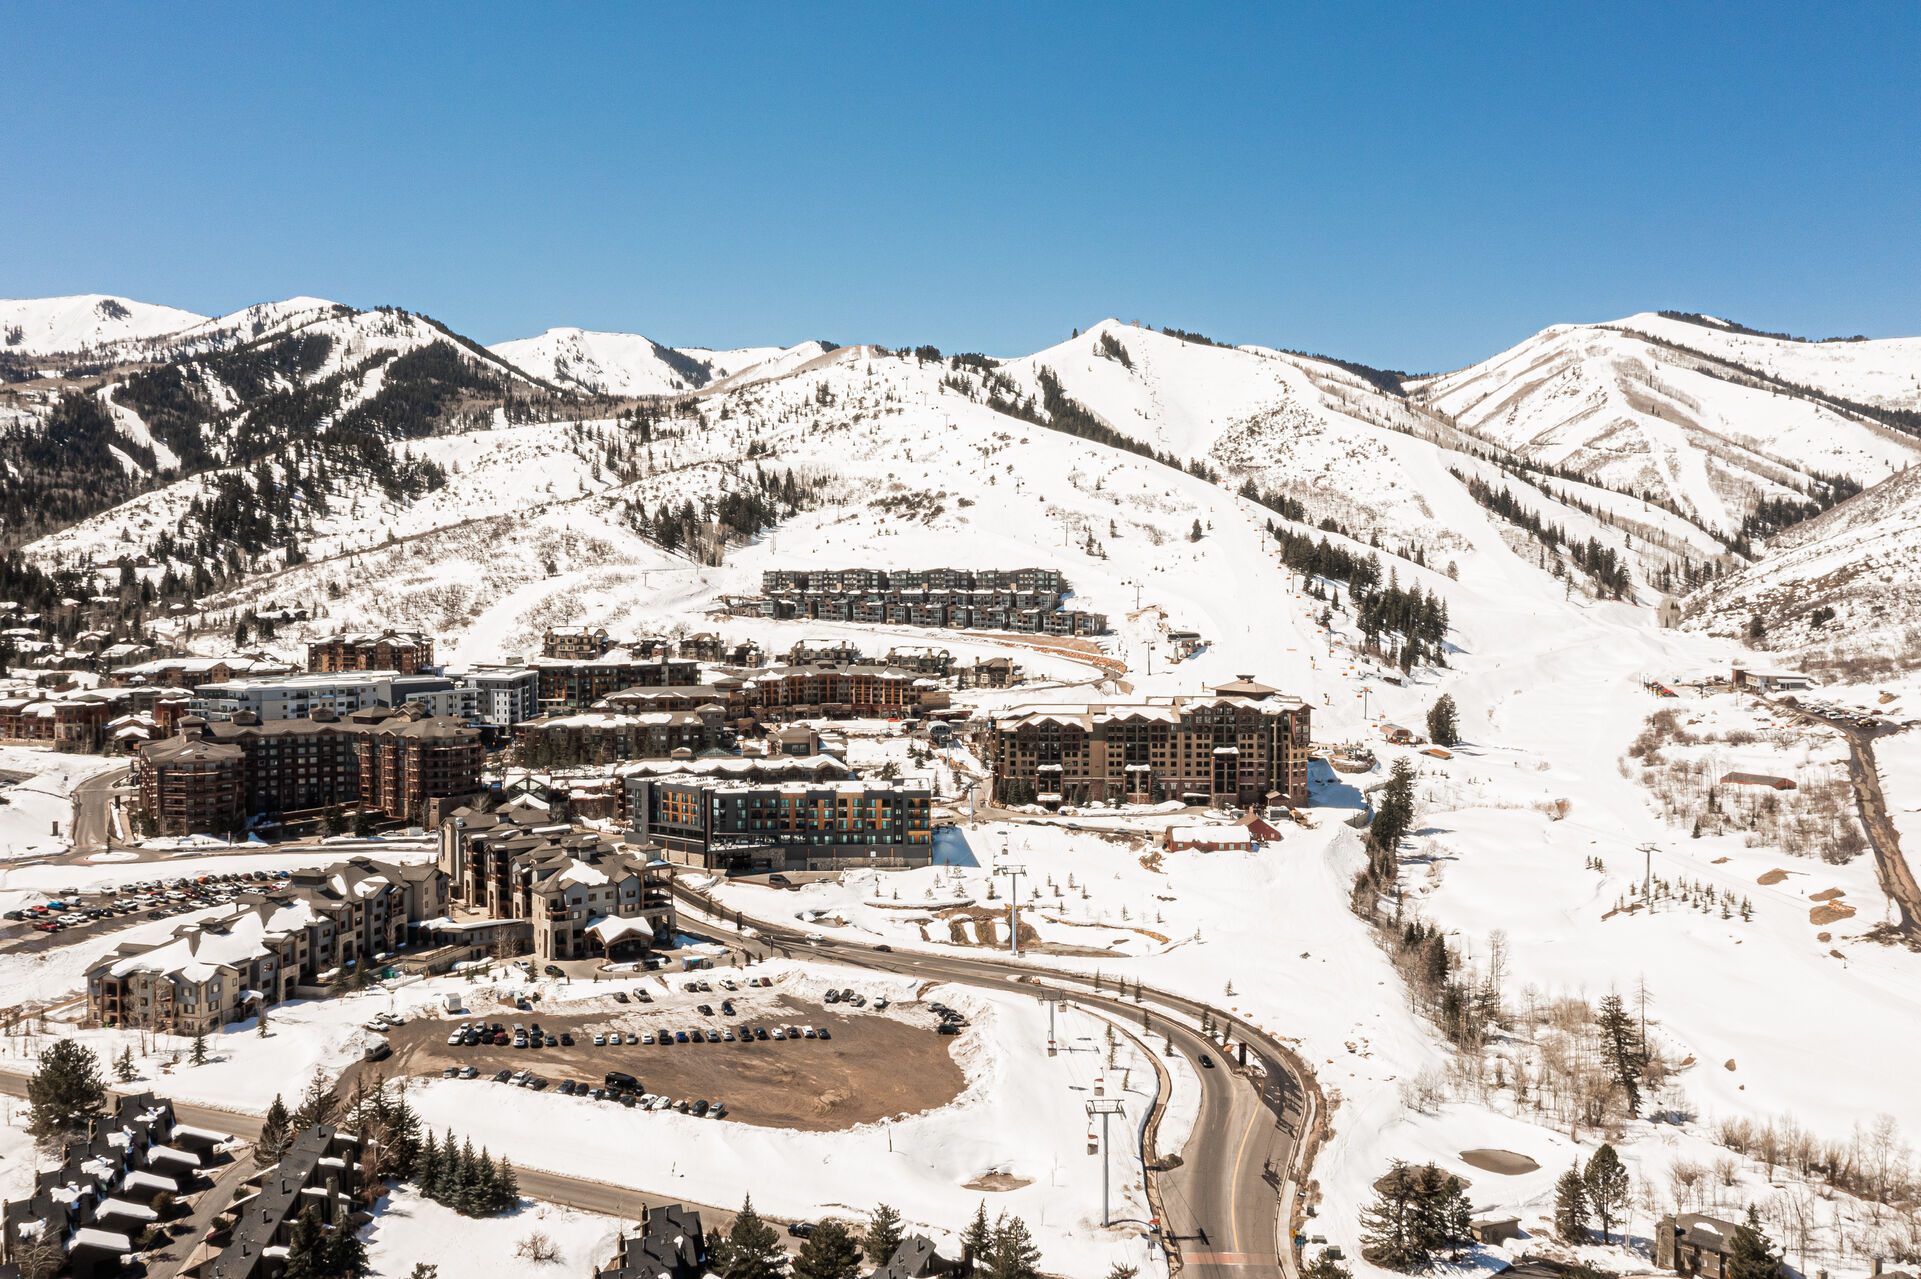 Arial view of the Silverado Lodge and surrounding slopes